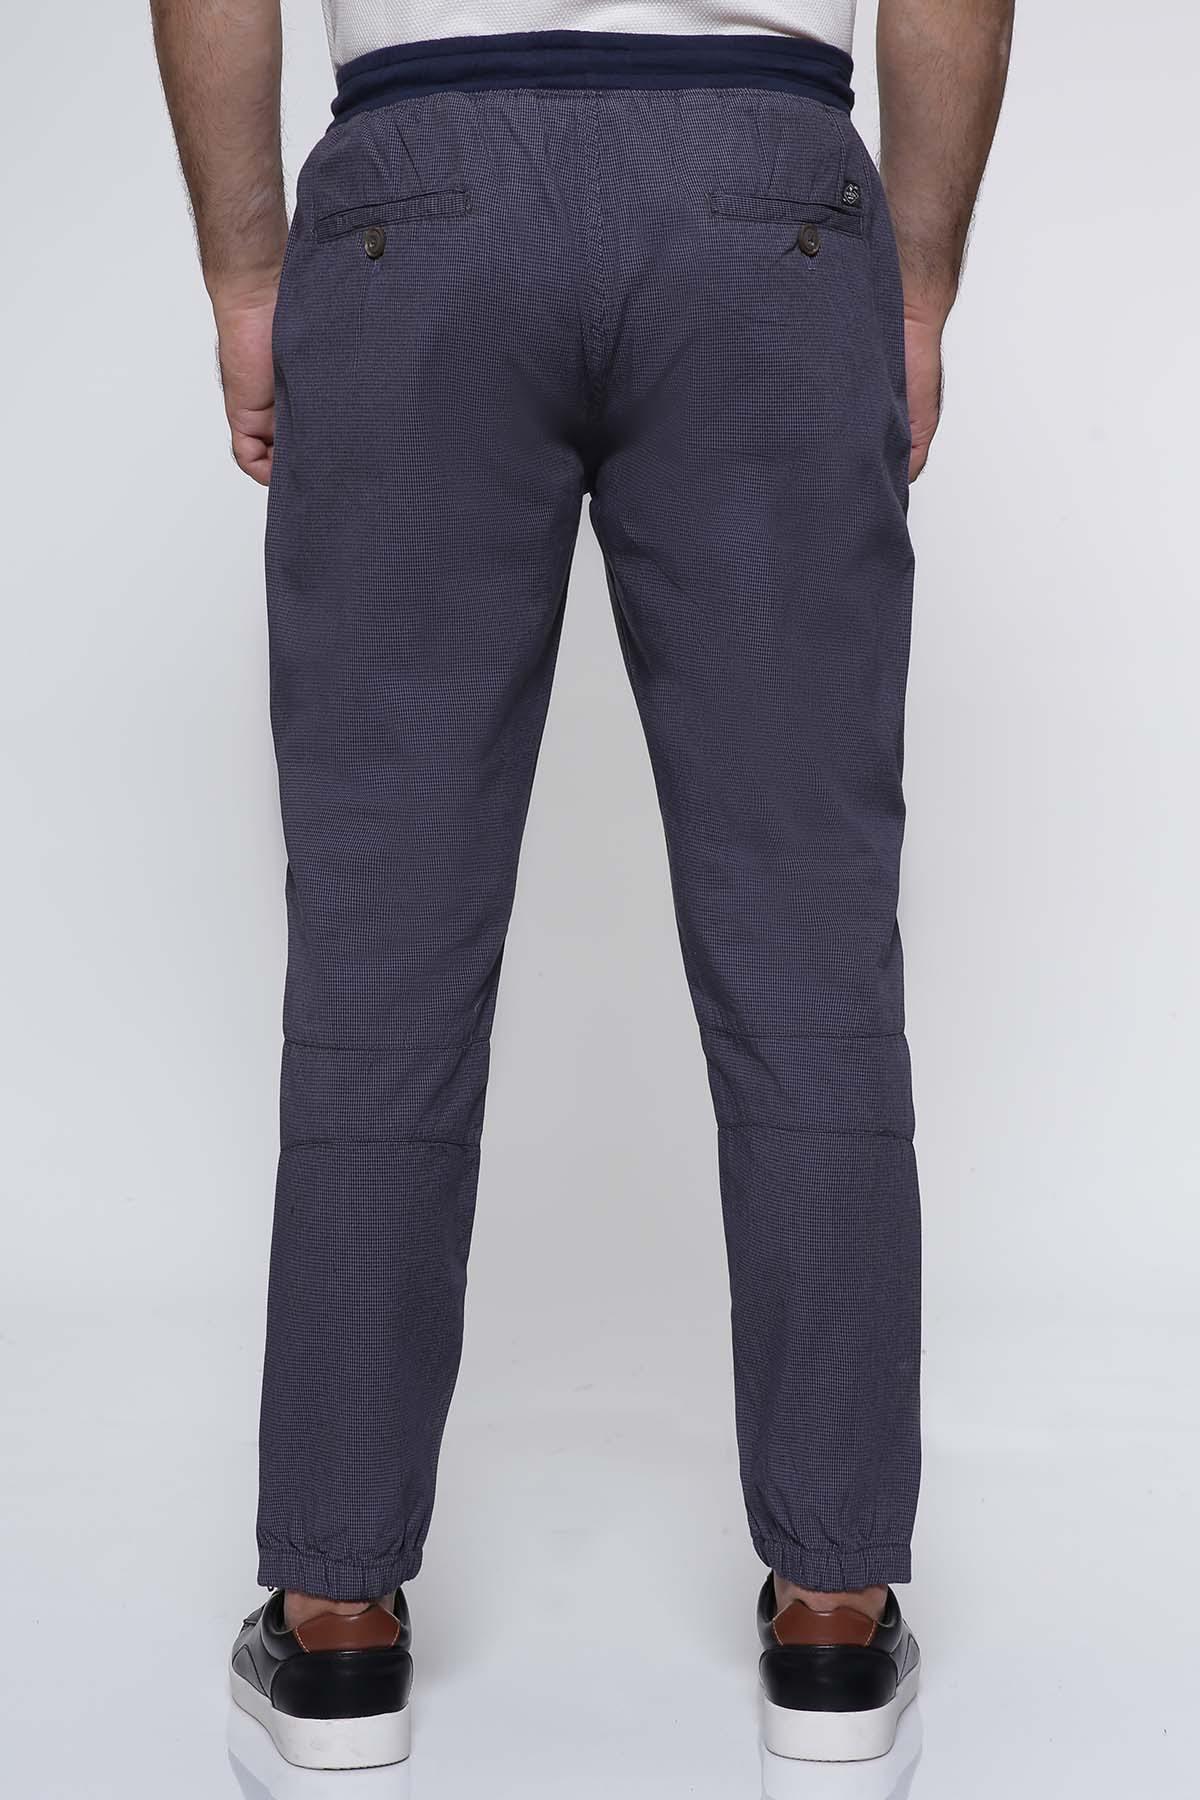 CASUAL TROUSER BLACK GREY at Charcoal Clothing